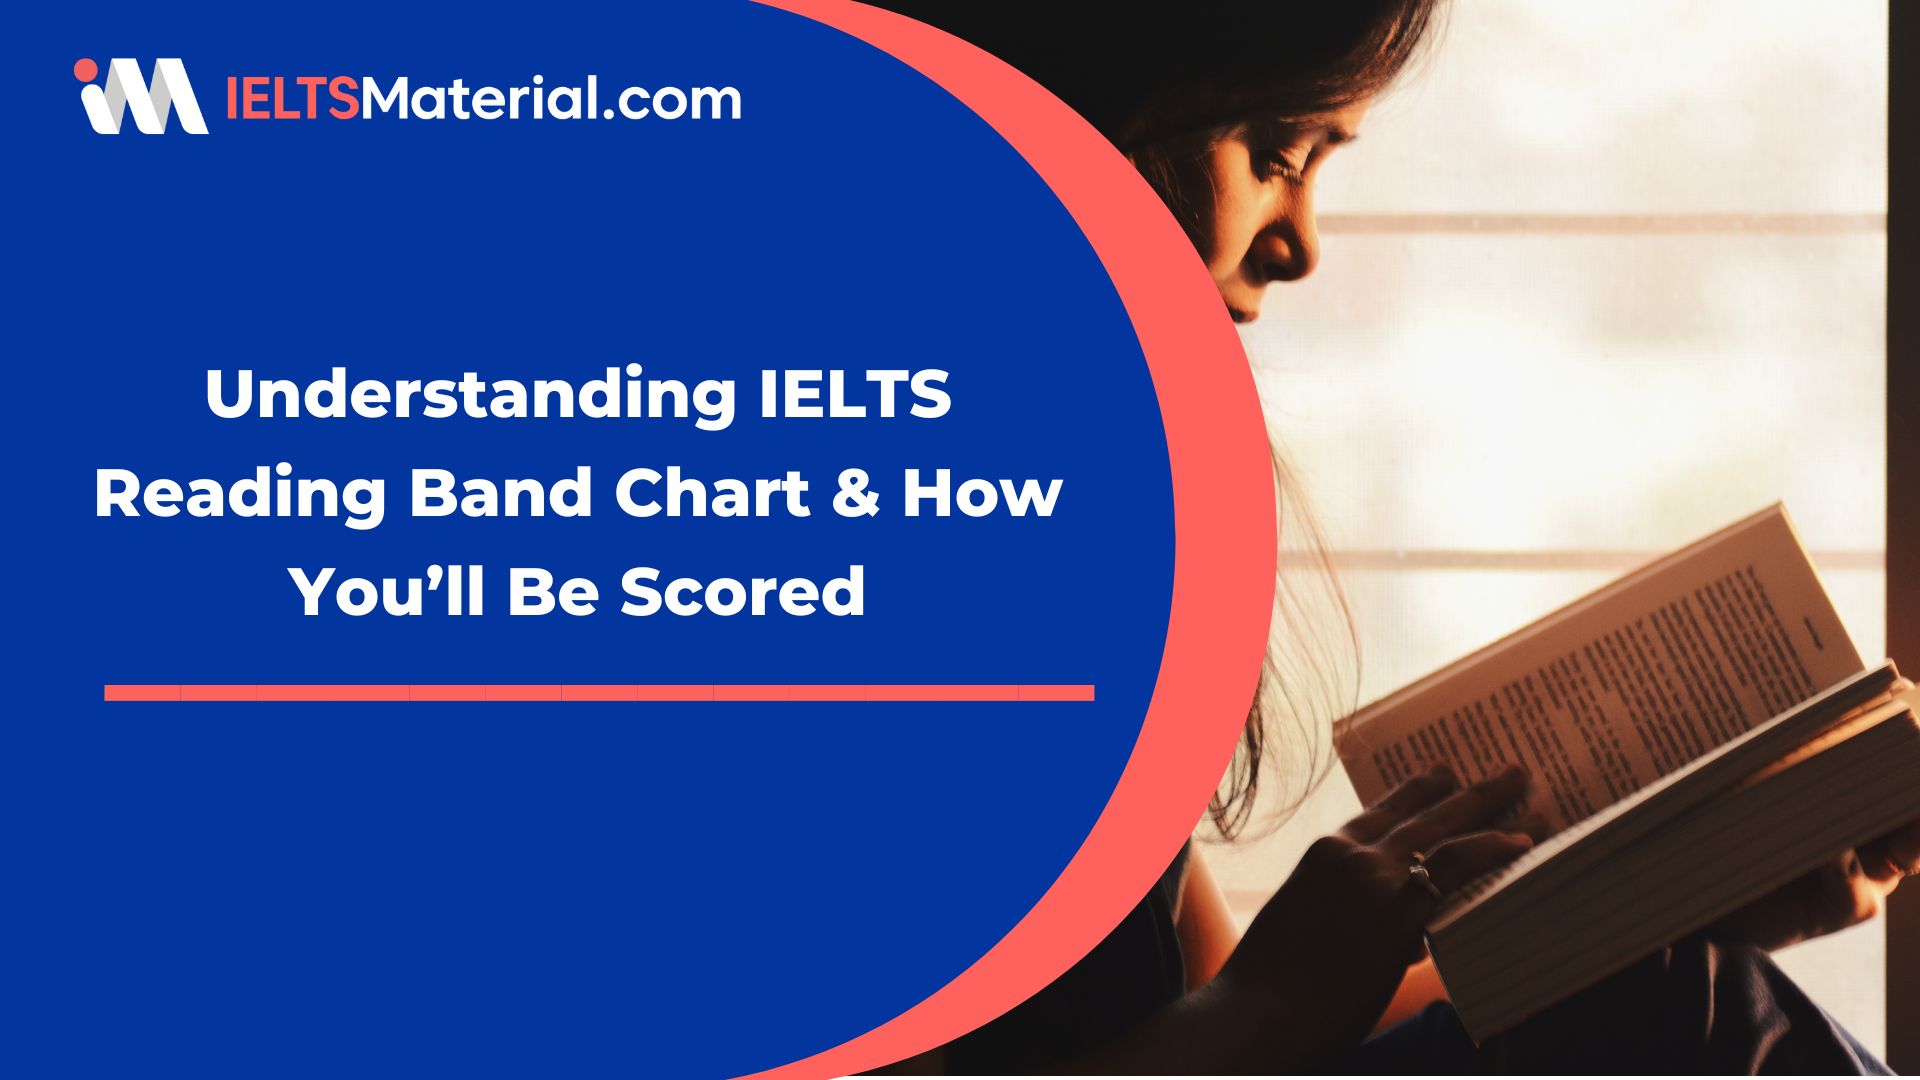 Understanding IELTS Reading Band Chart & How You’ll Be Scored